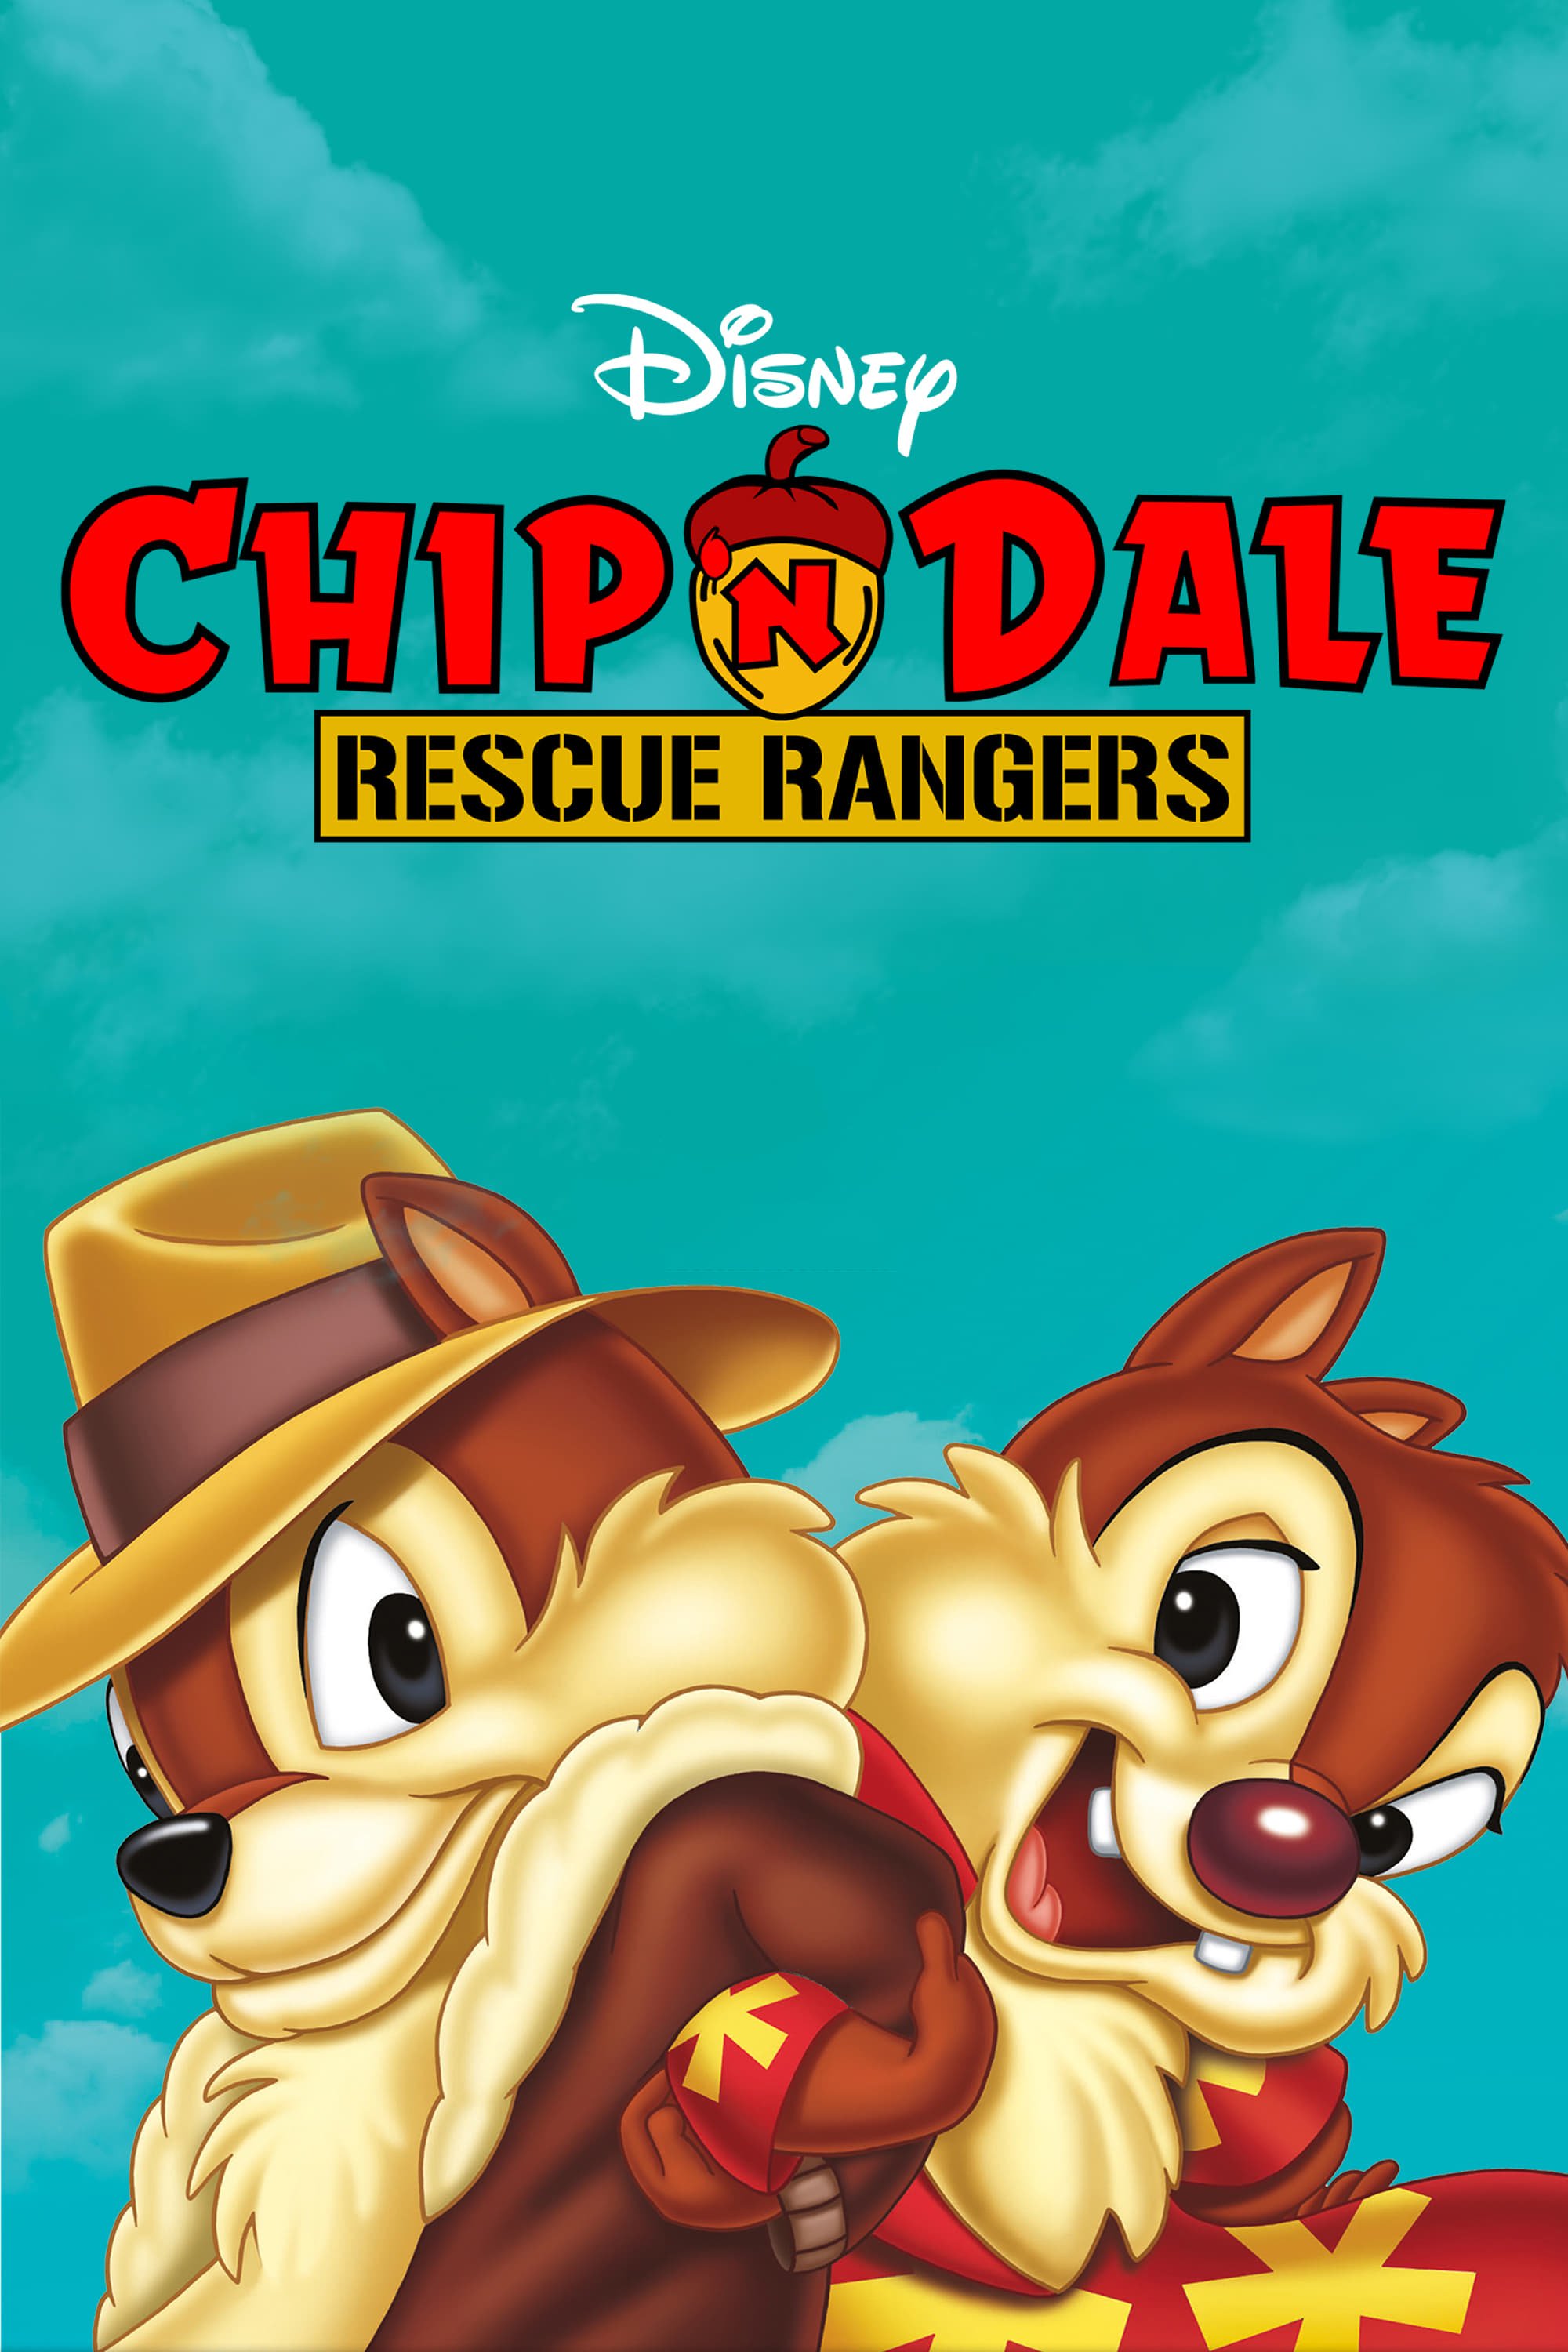 Chip 'n' Dale Rescue Rangers (1989)